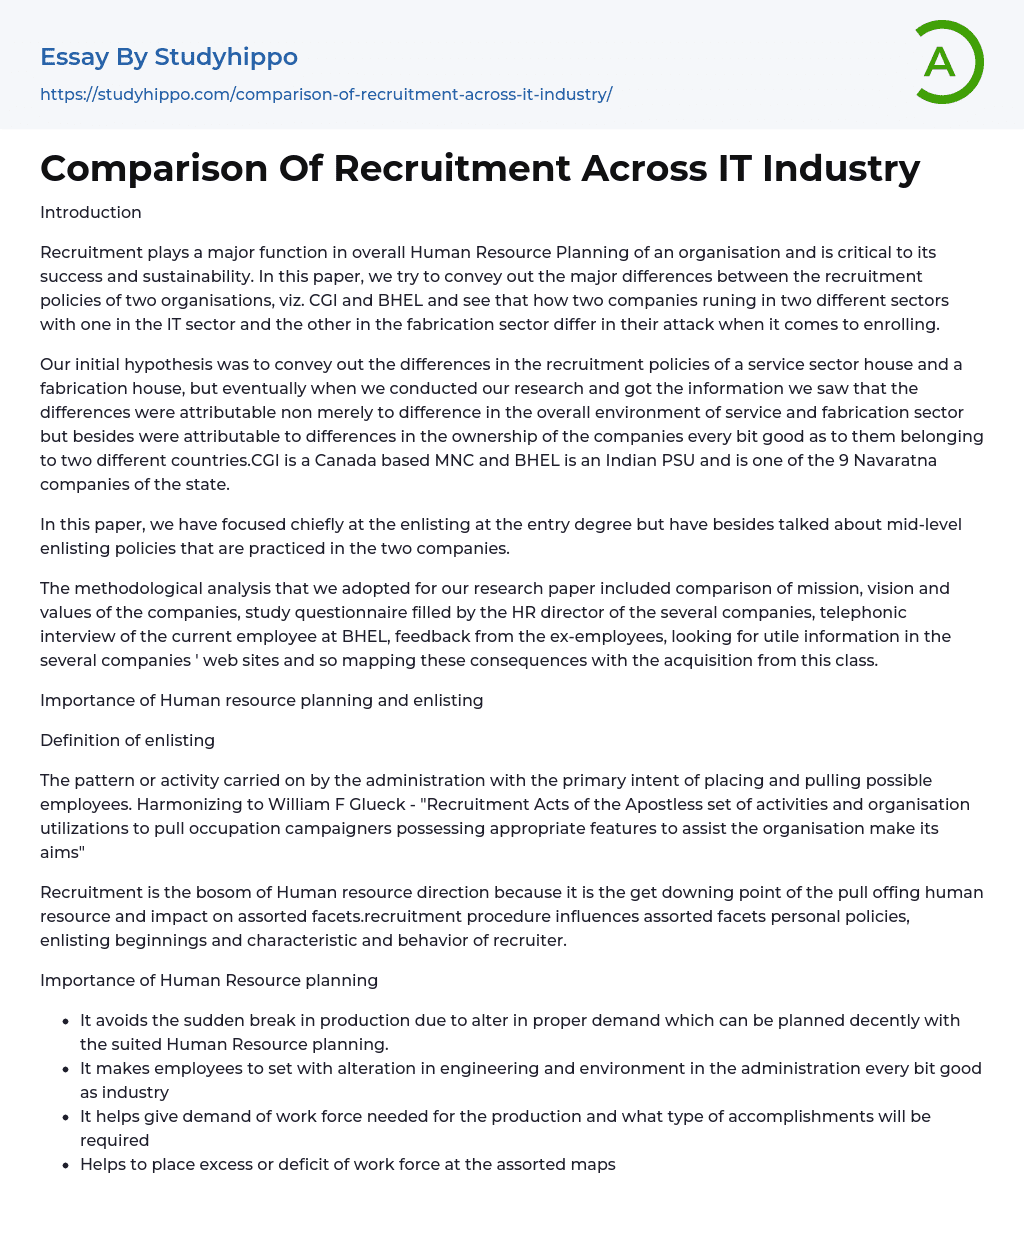 Comparison Of Recruitment Across IT Industry Essay Example